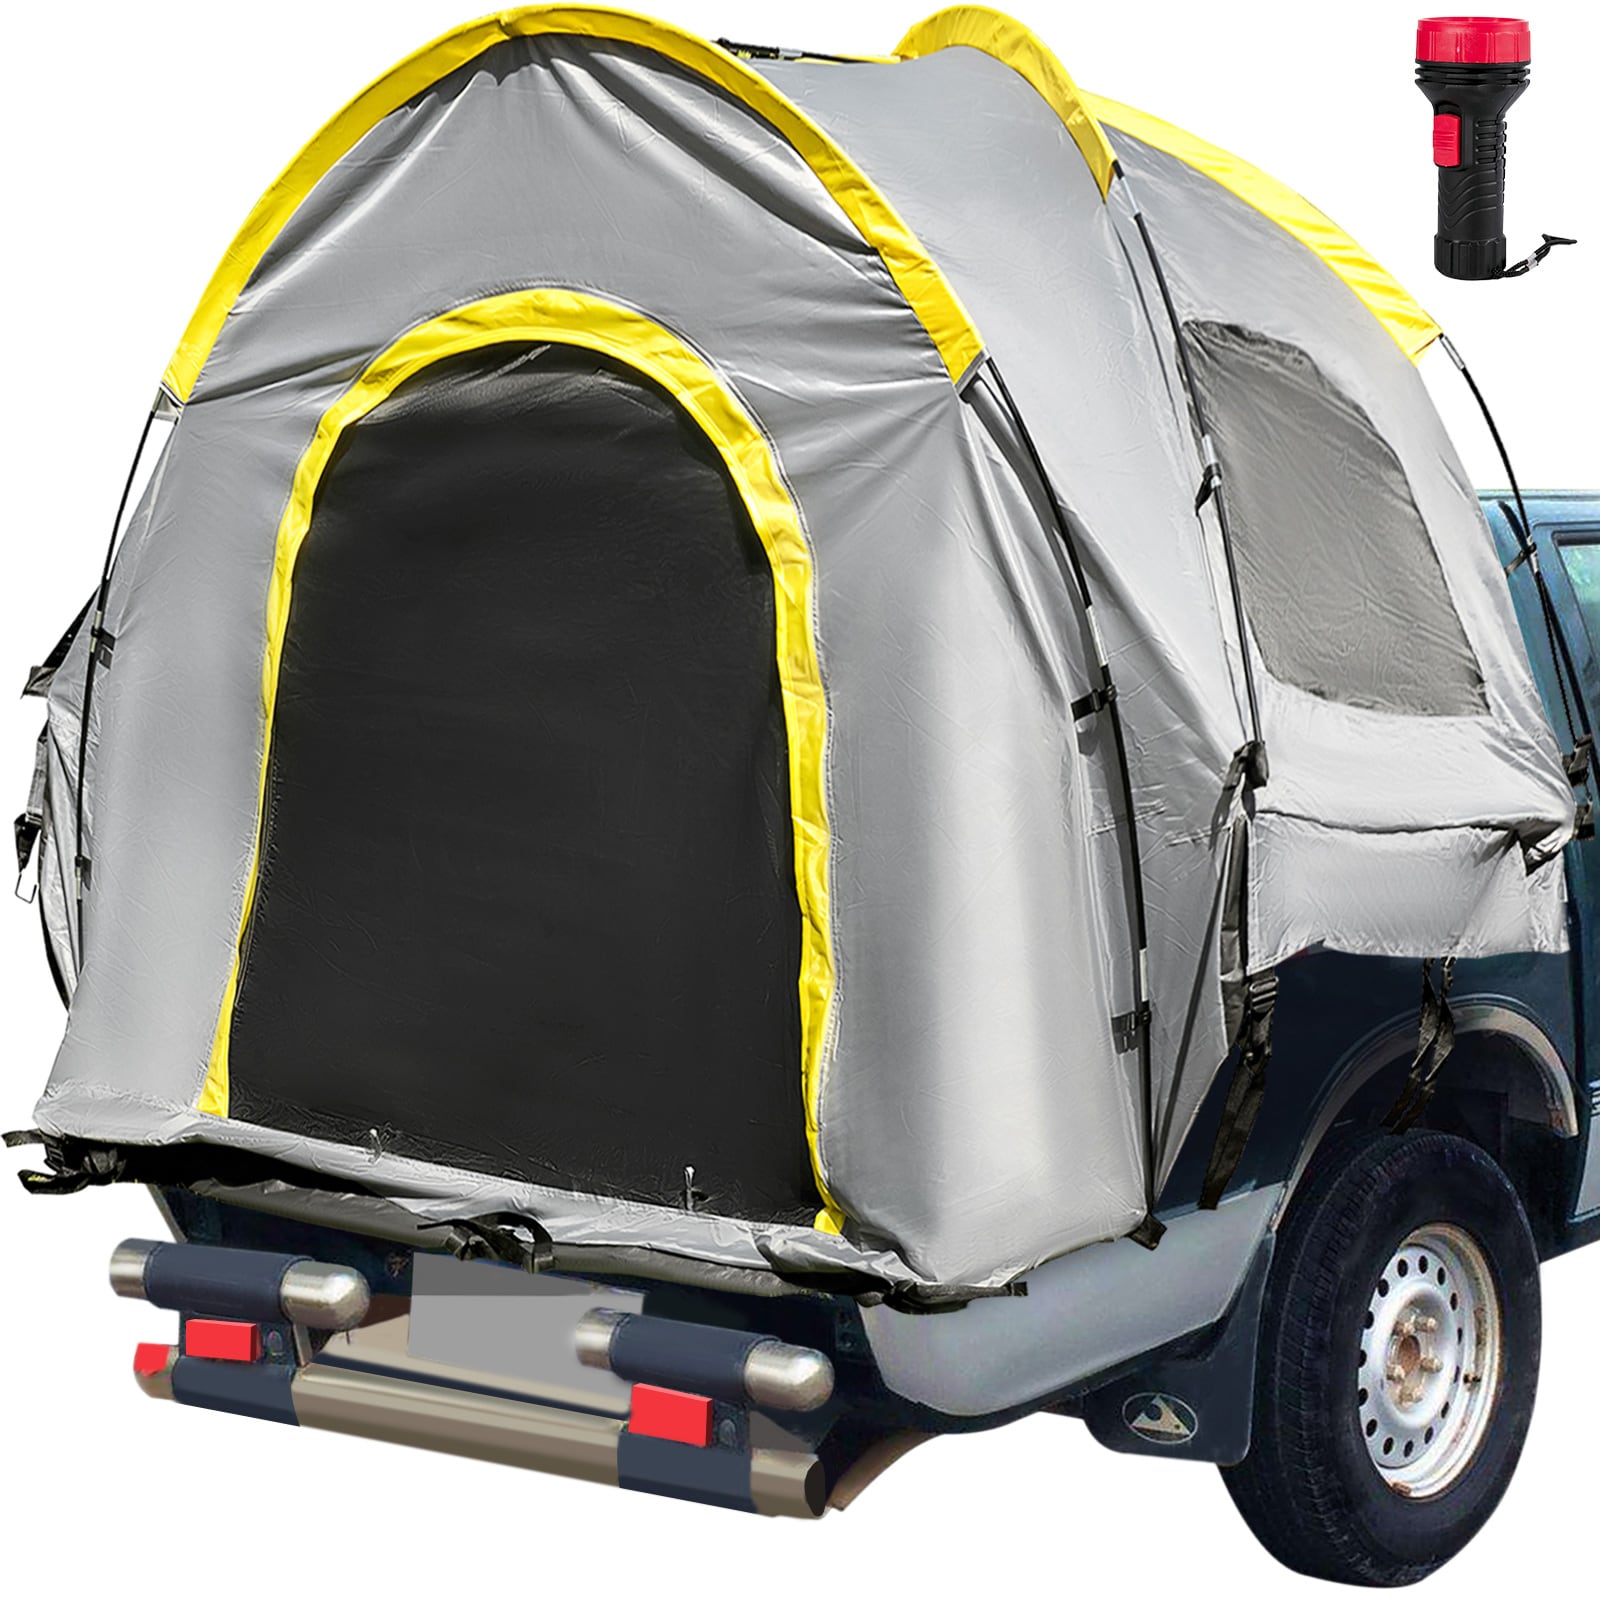 Ambassade Collega Neerduwen VEVOR Truck Tent 6 FT Tall Bed Truck Bed Tent, Pickup Tent for Mid Size  Truck, Waterproof Truck Camper, 2-Person Sleeping Capacity, 2 Mesh Windows,  Easy to Setup Truck Tents for Camping,